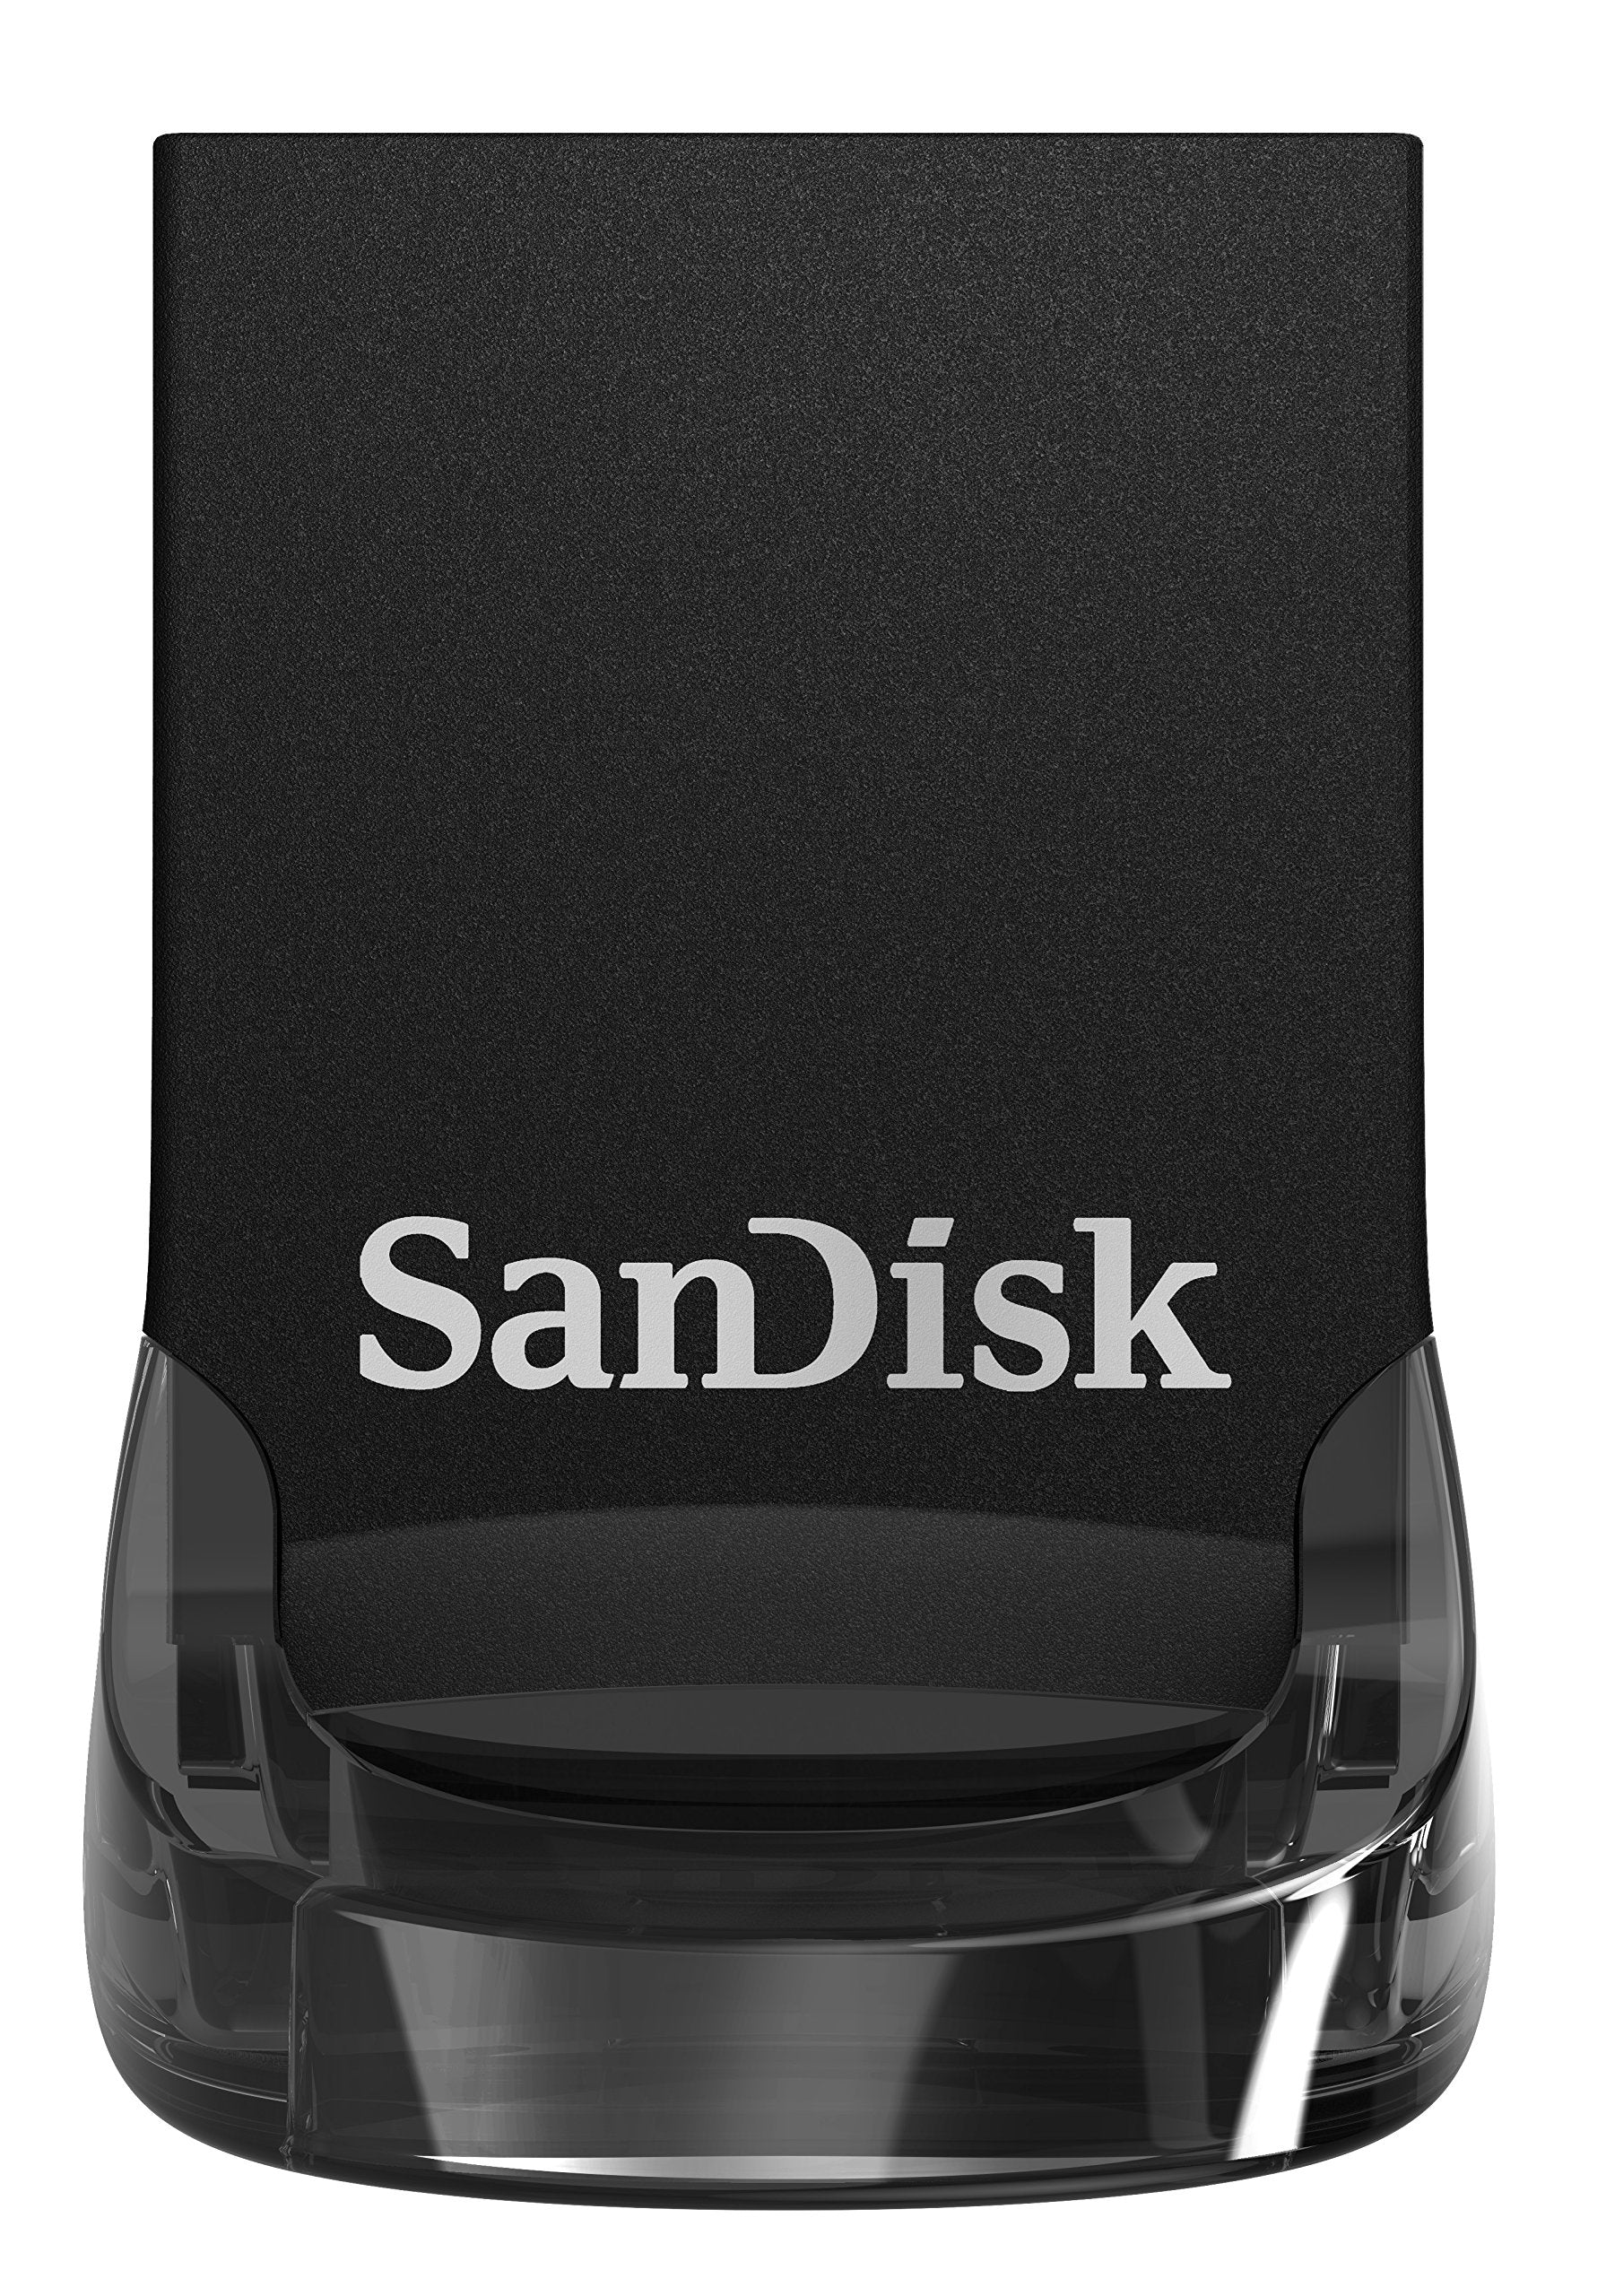 SanDisk Ultra Fit 64GB USB 3.1 Flash Drive up to 130MB/s read